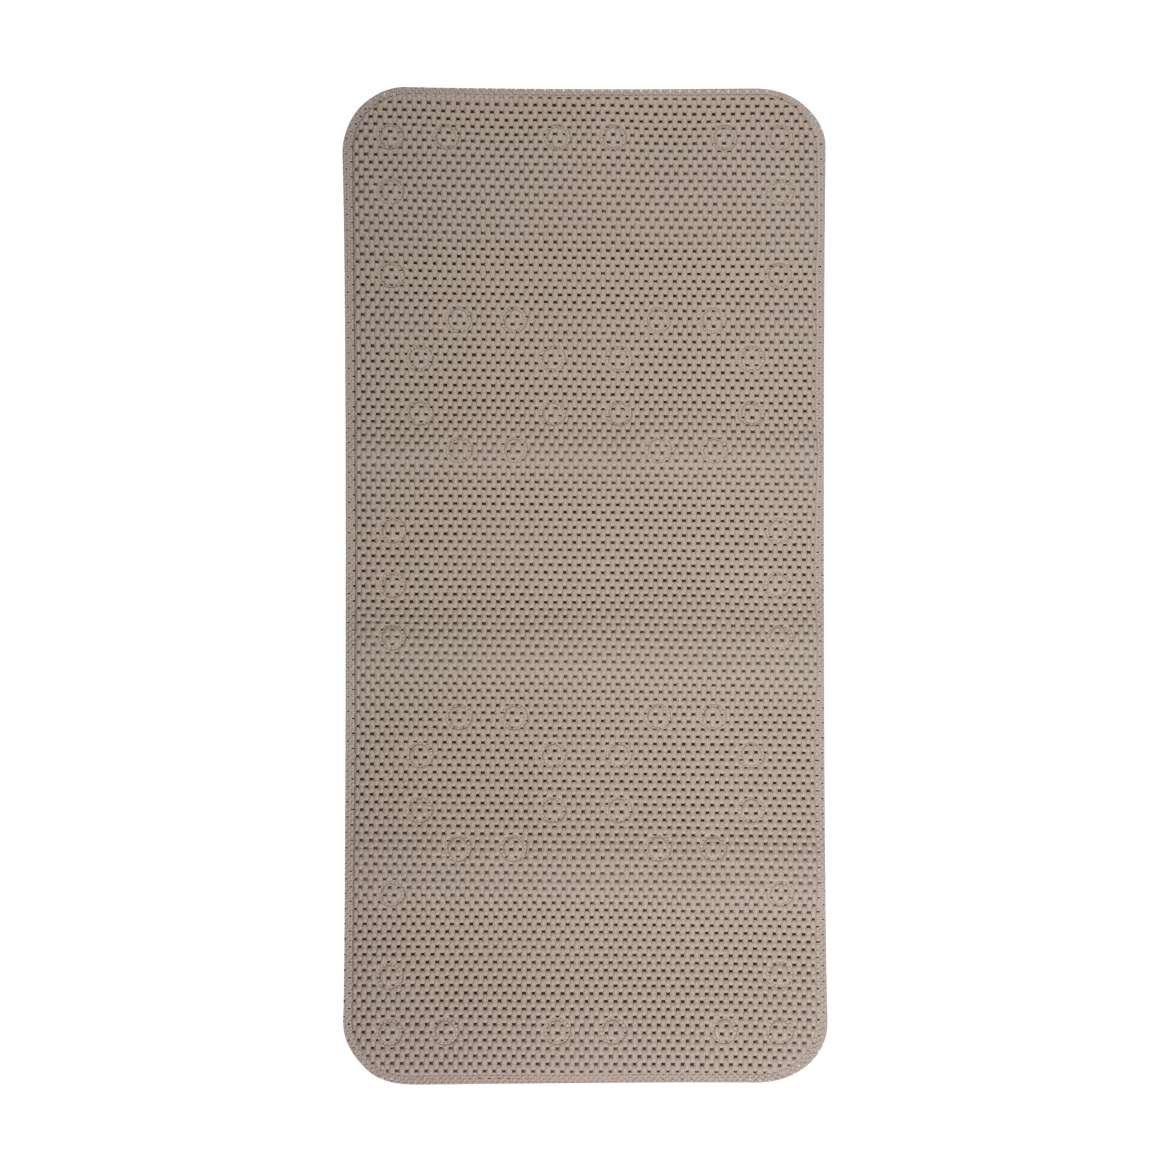 Softex Bath Mats - Taupe, 17 in. x 36 in. | Duck Brand